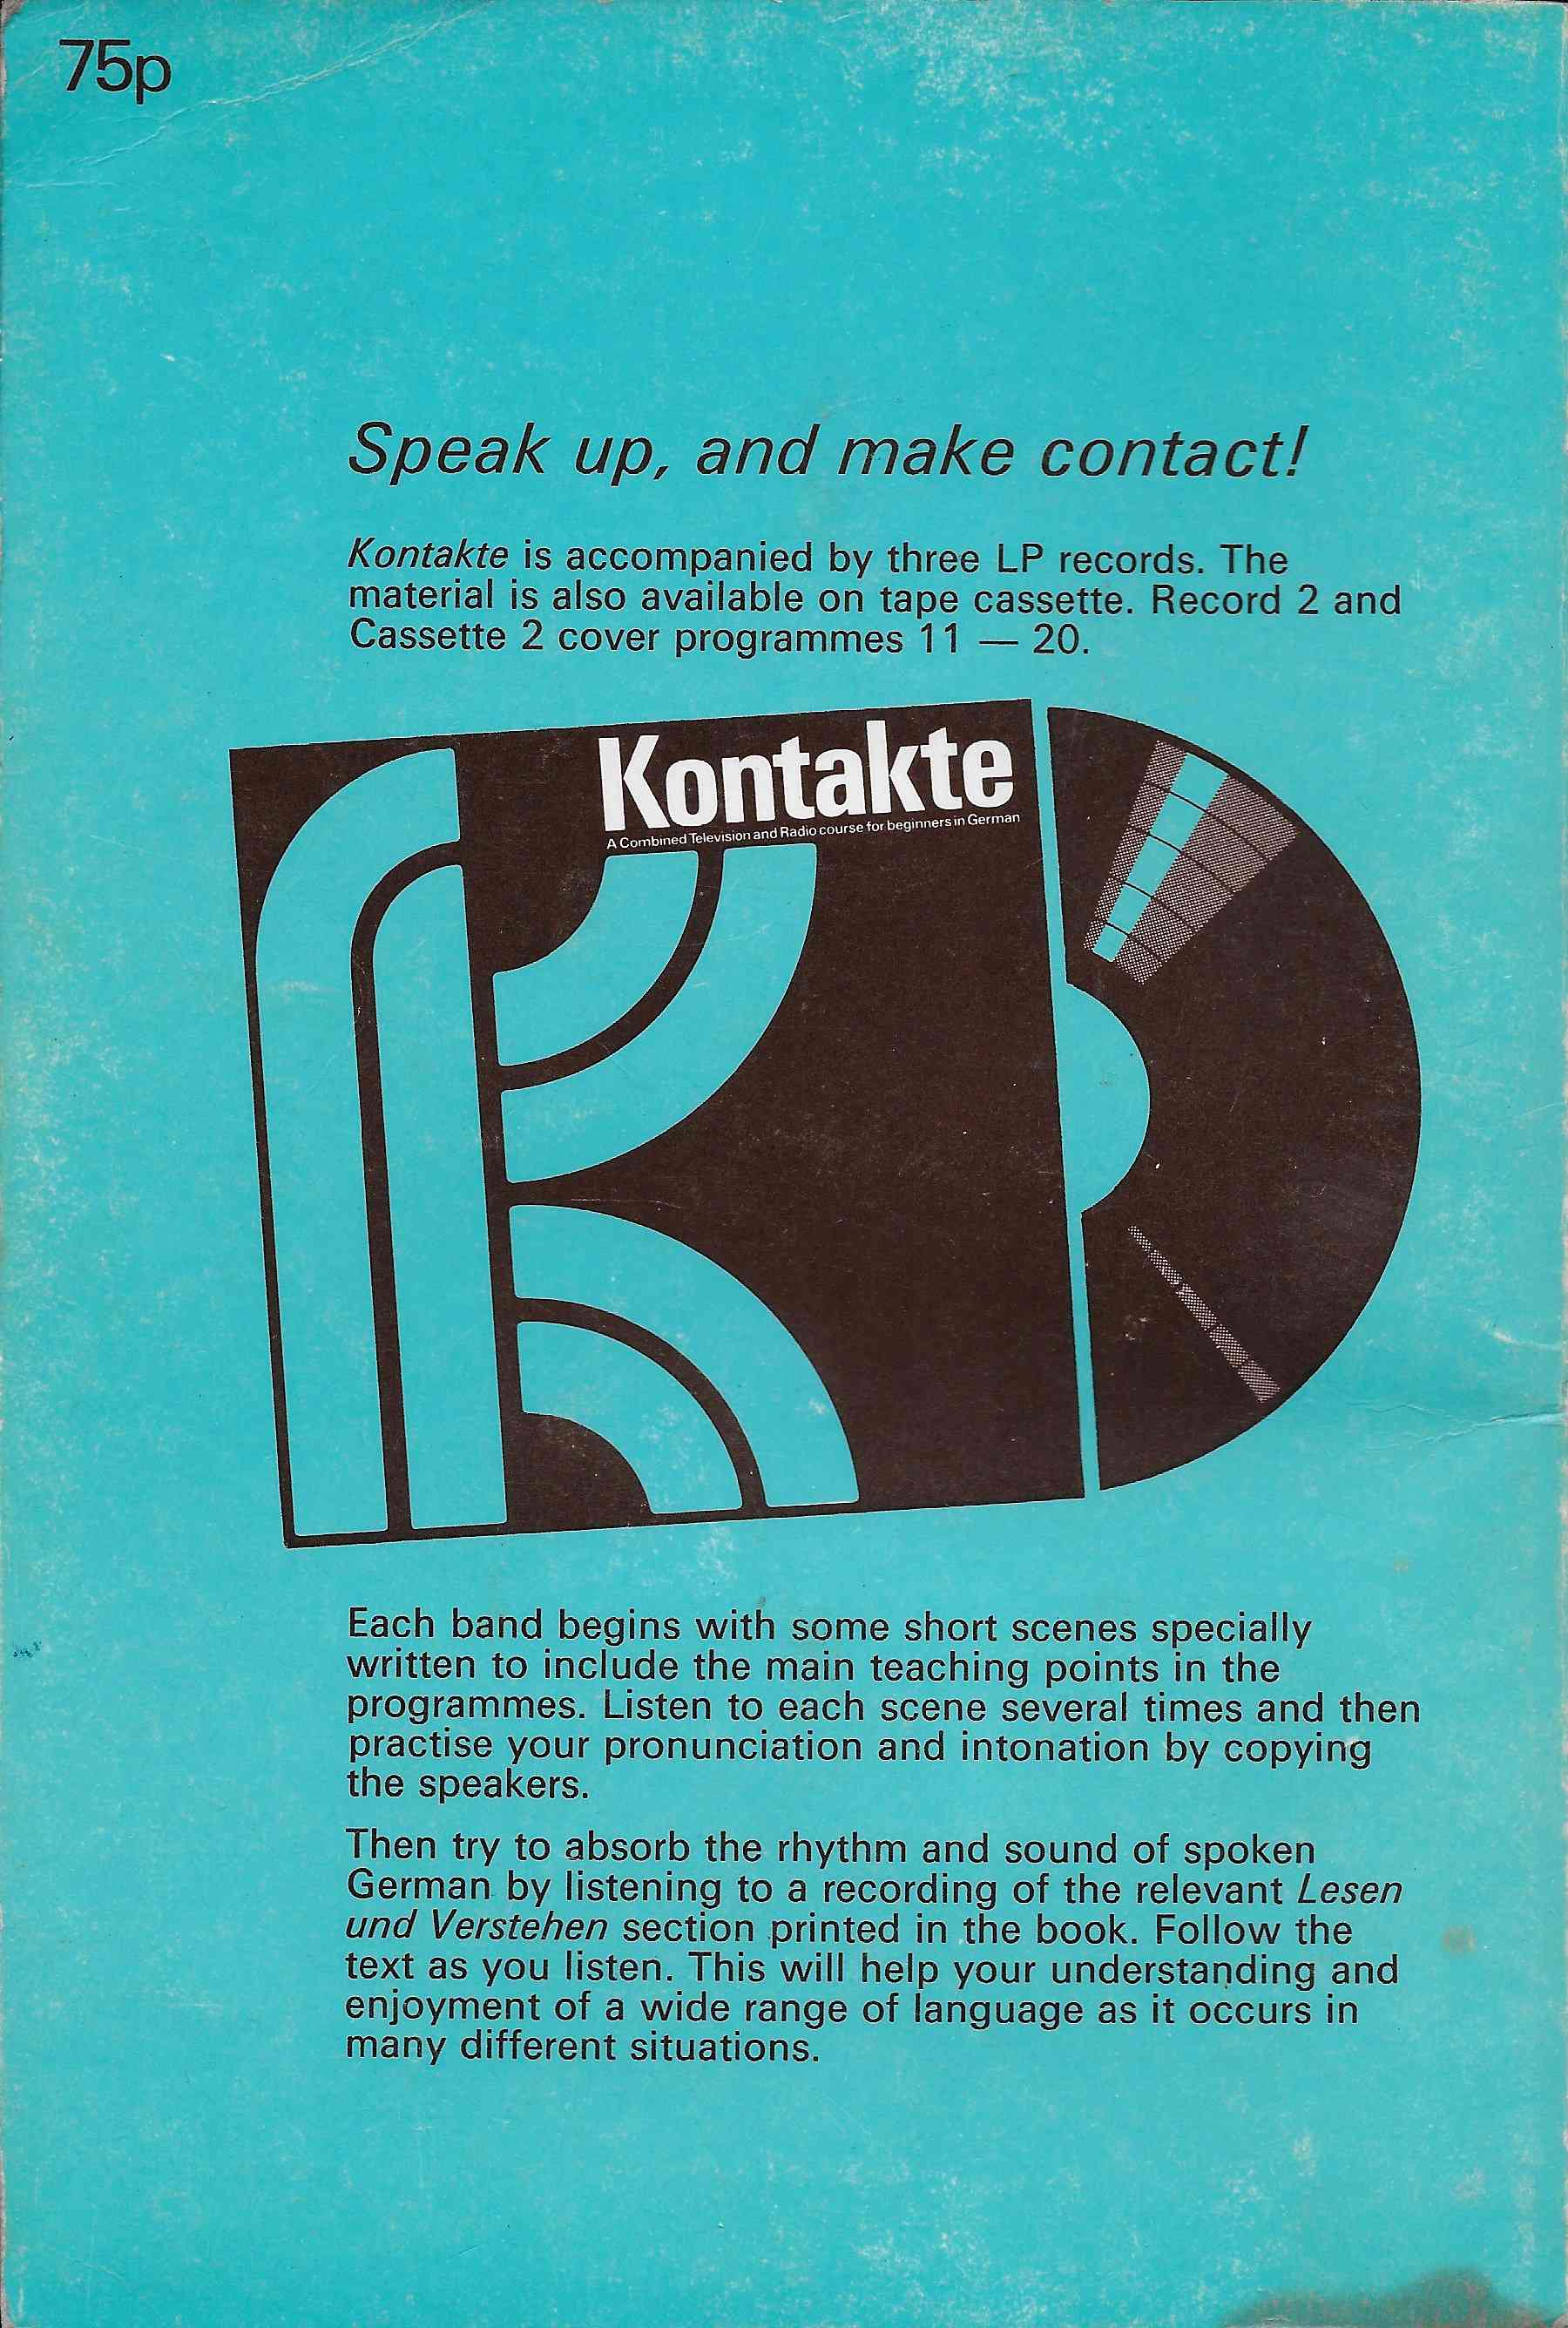 Picture of ISBN 0 563 10864 9 Kontakte 2 by artist Corinna Schabel / Antony Peck from the BBC records and Tapes library